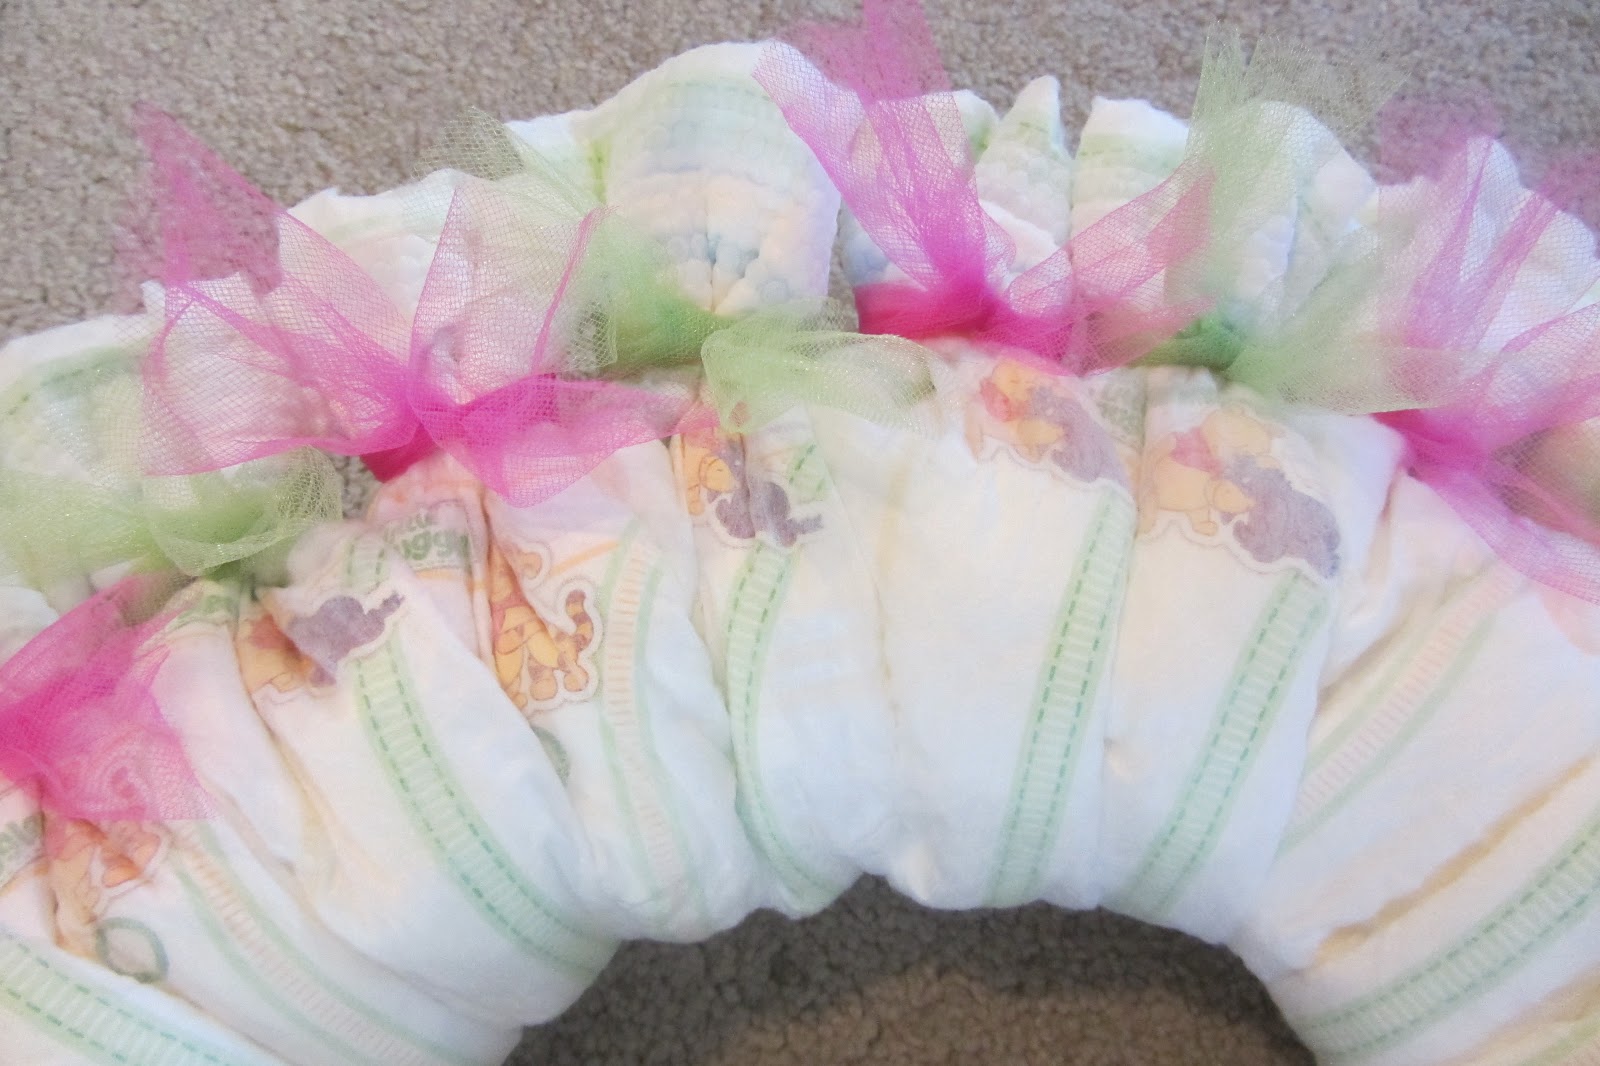 Tie tulle onto each diaper to hide rubber bands .